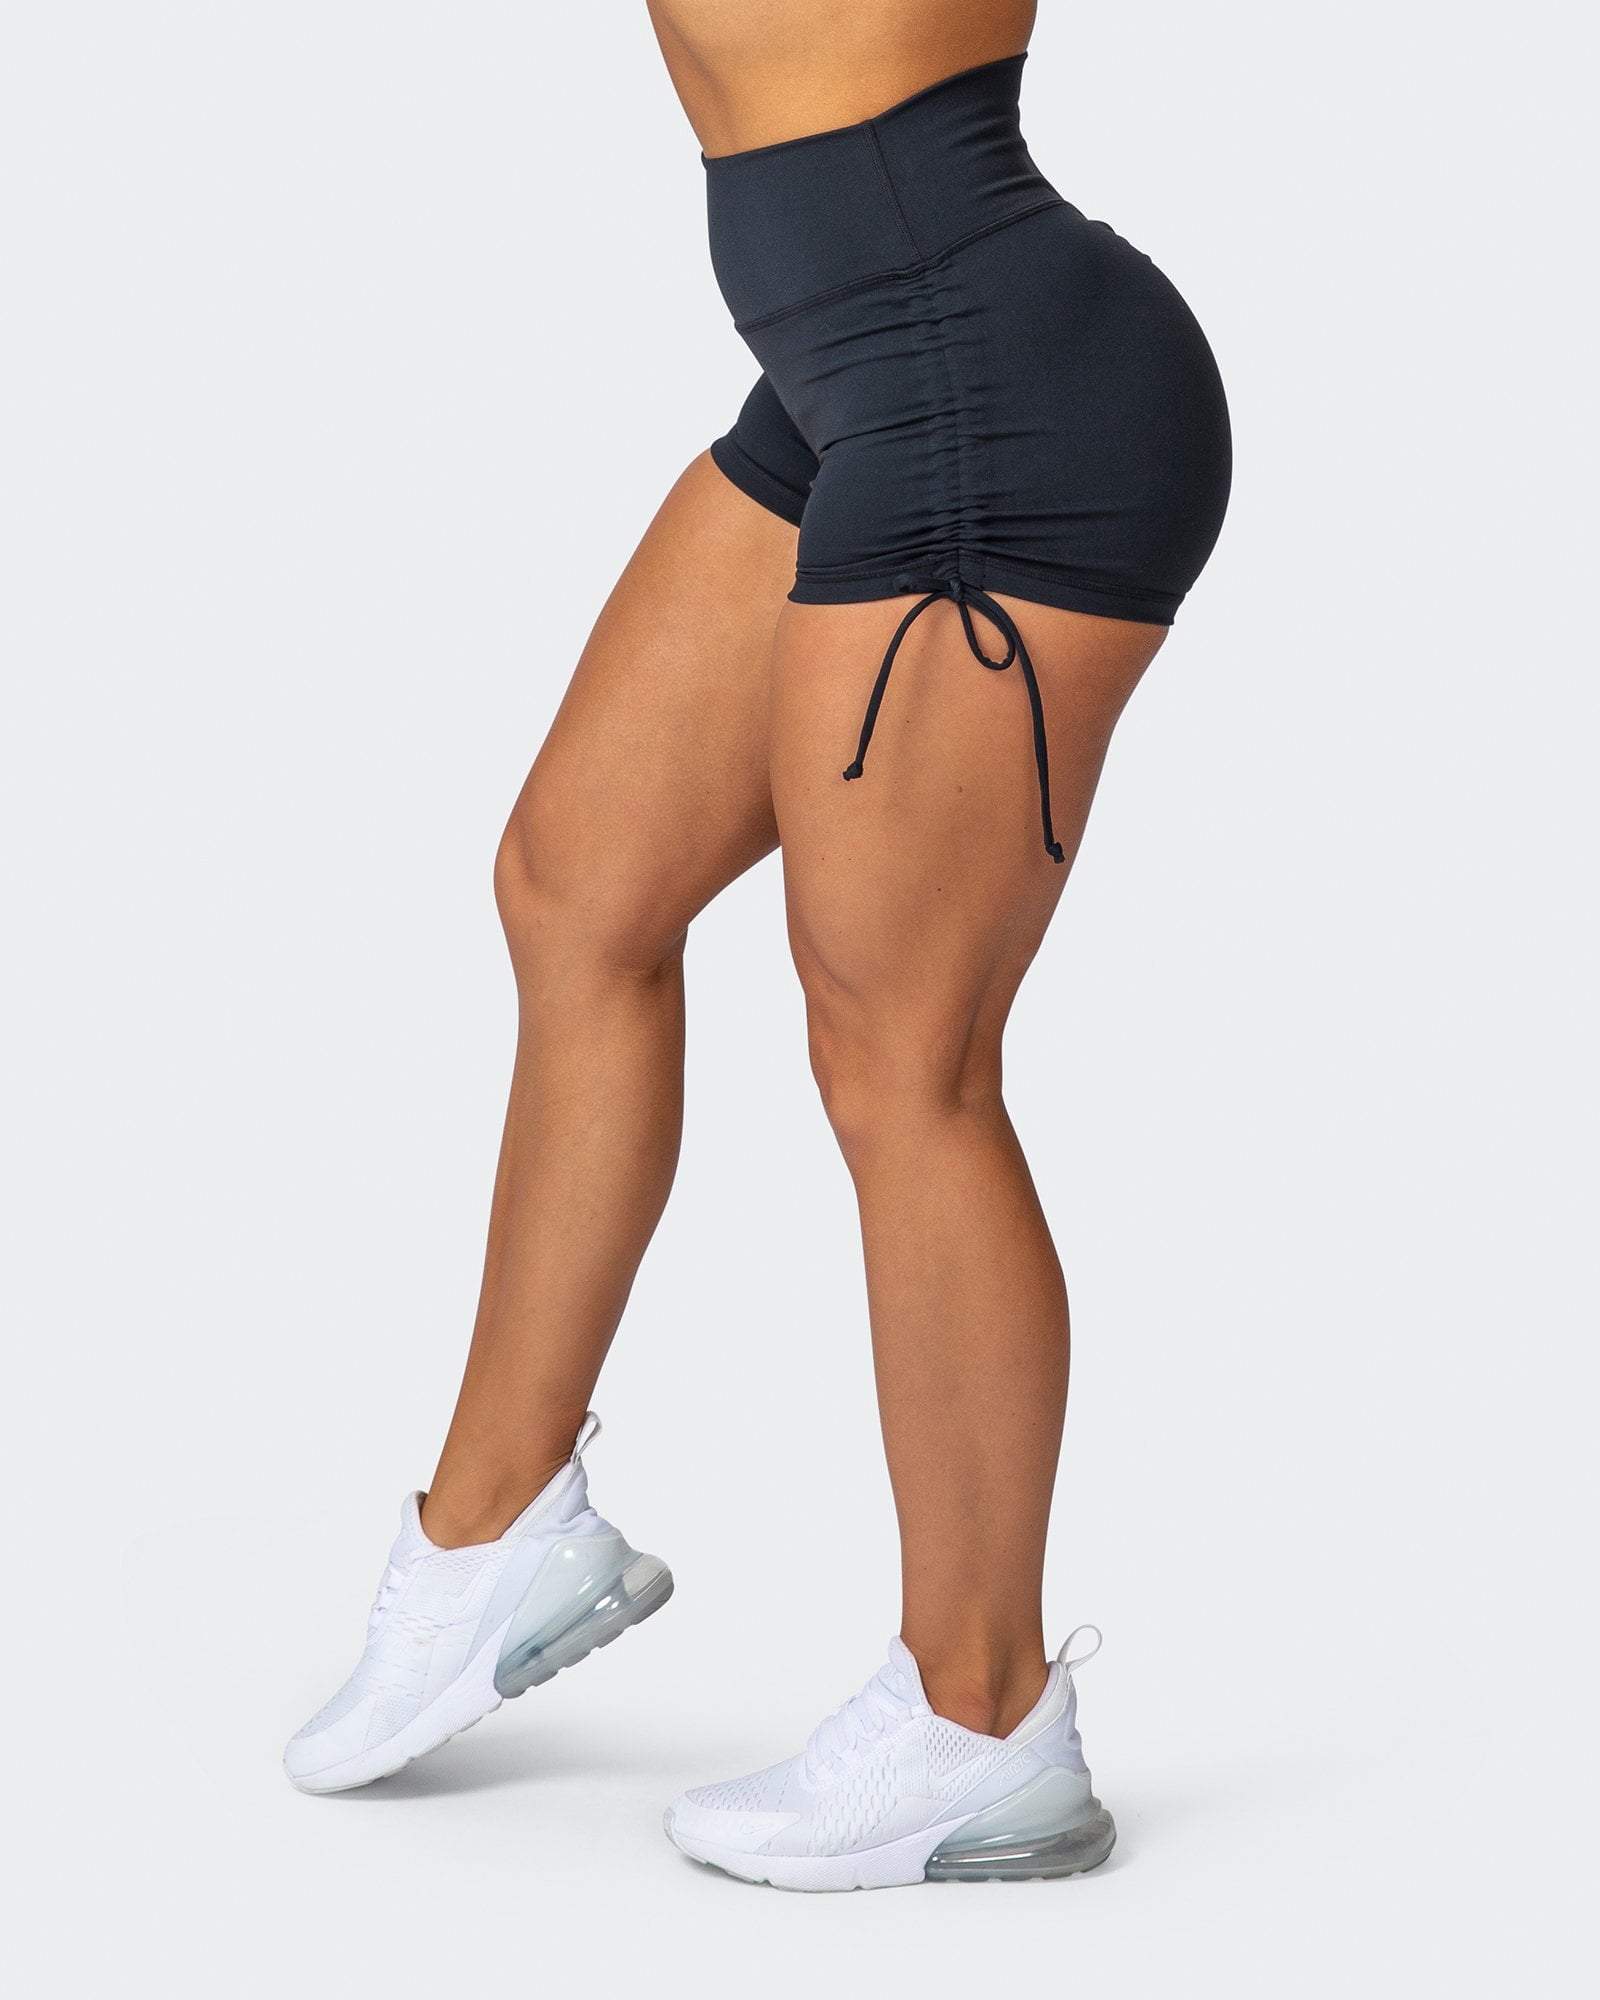 musclenation SIGNATURE SCRUNCH TIE UP BOOTY SHORTS Black